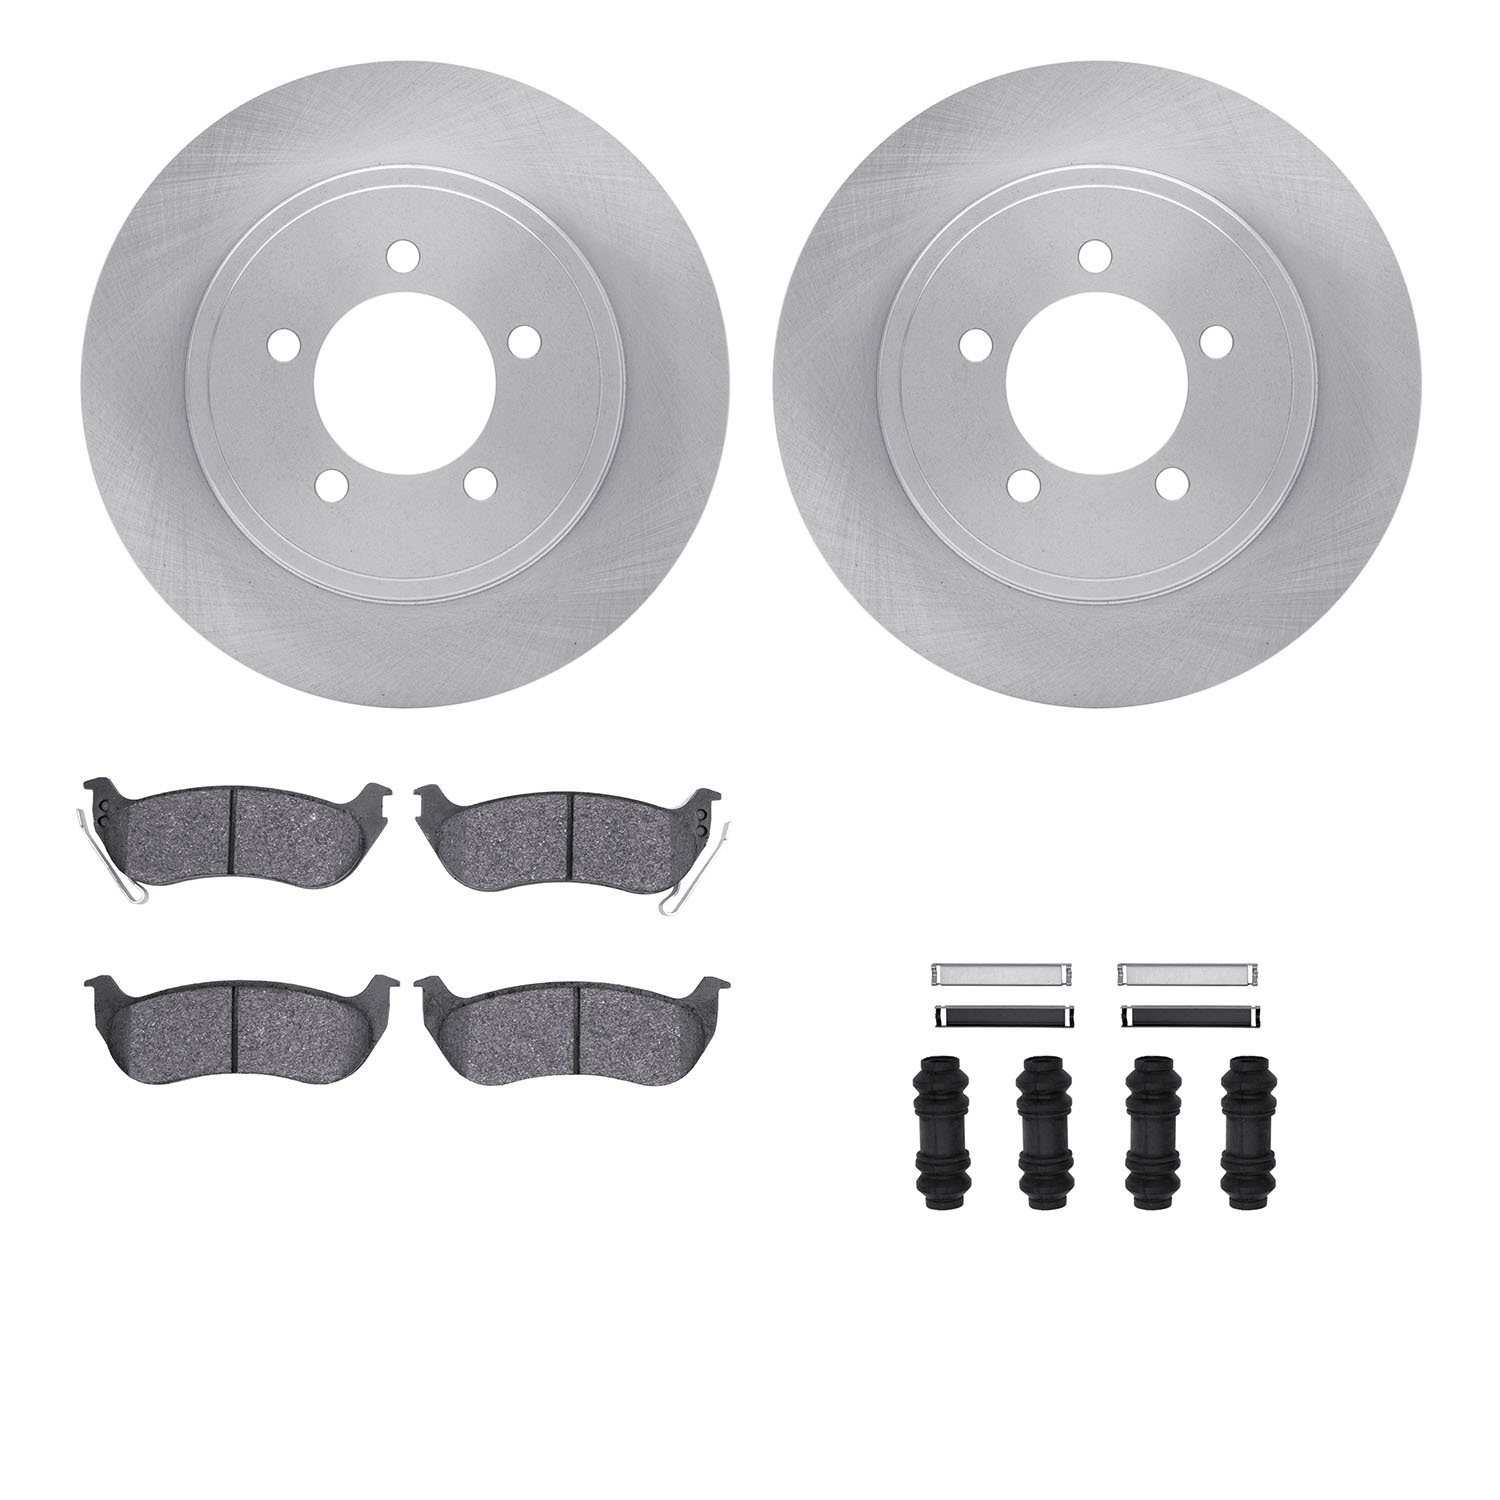 6412-54192 Brake Rotors with Ultimate-Duty Brake Pads Kit & Hardware, 2006-2010 Ford/Lincoln/Mercury/Mazda, Position: Rear